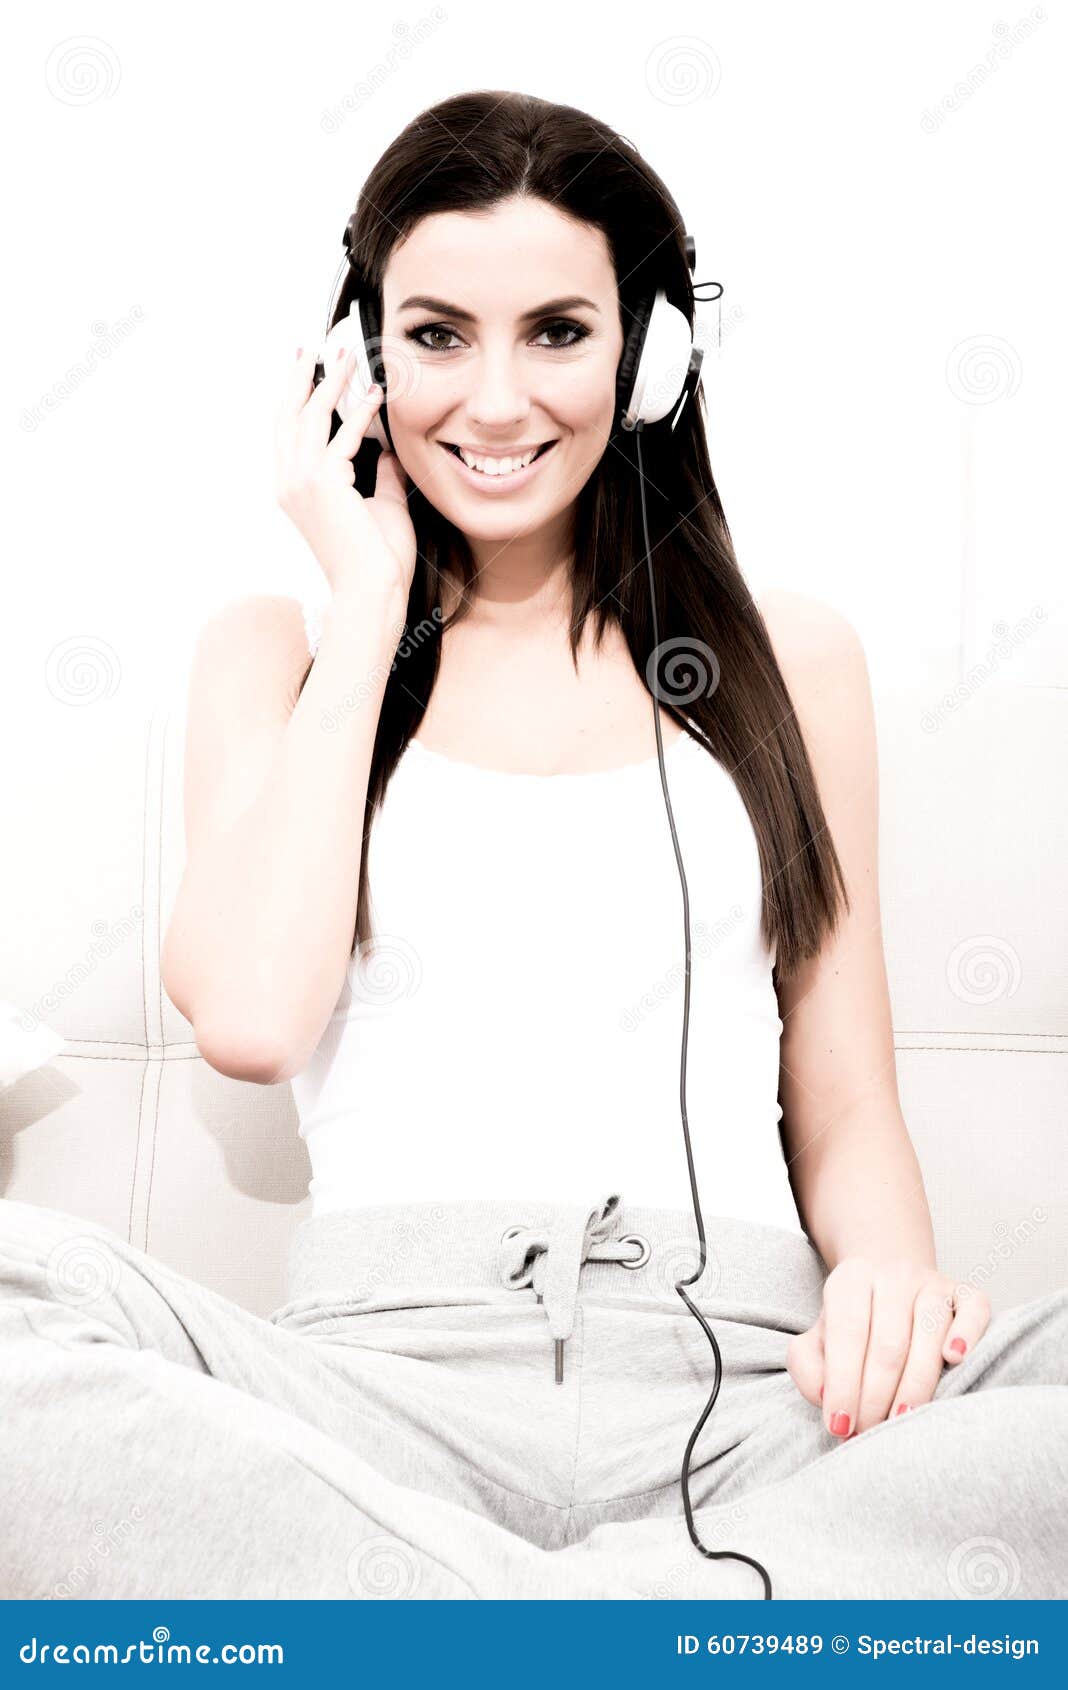 Young Beautiful Woman Listening To Audio Stock Image   Image Of